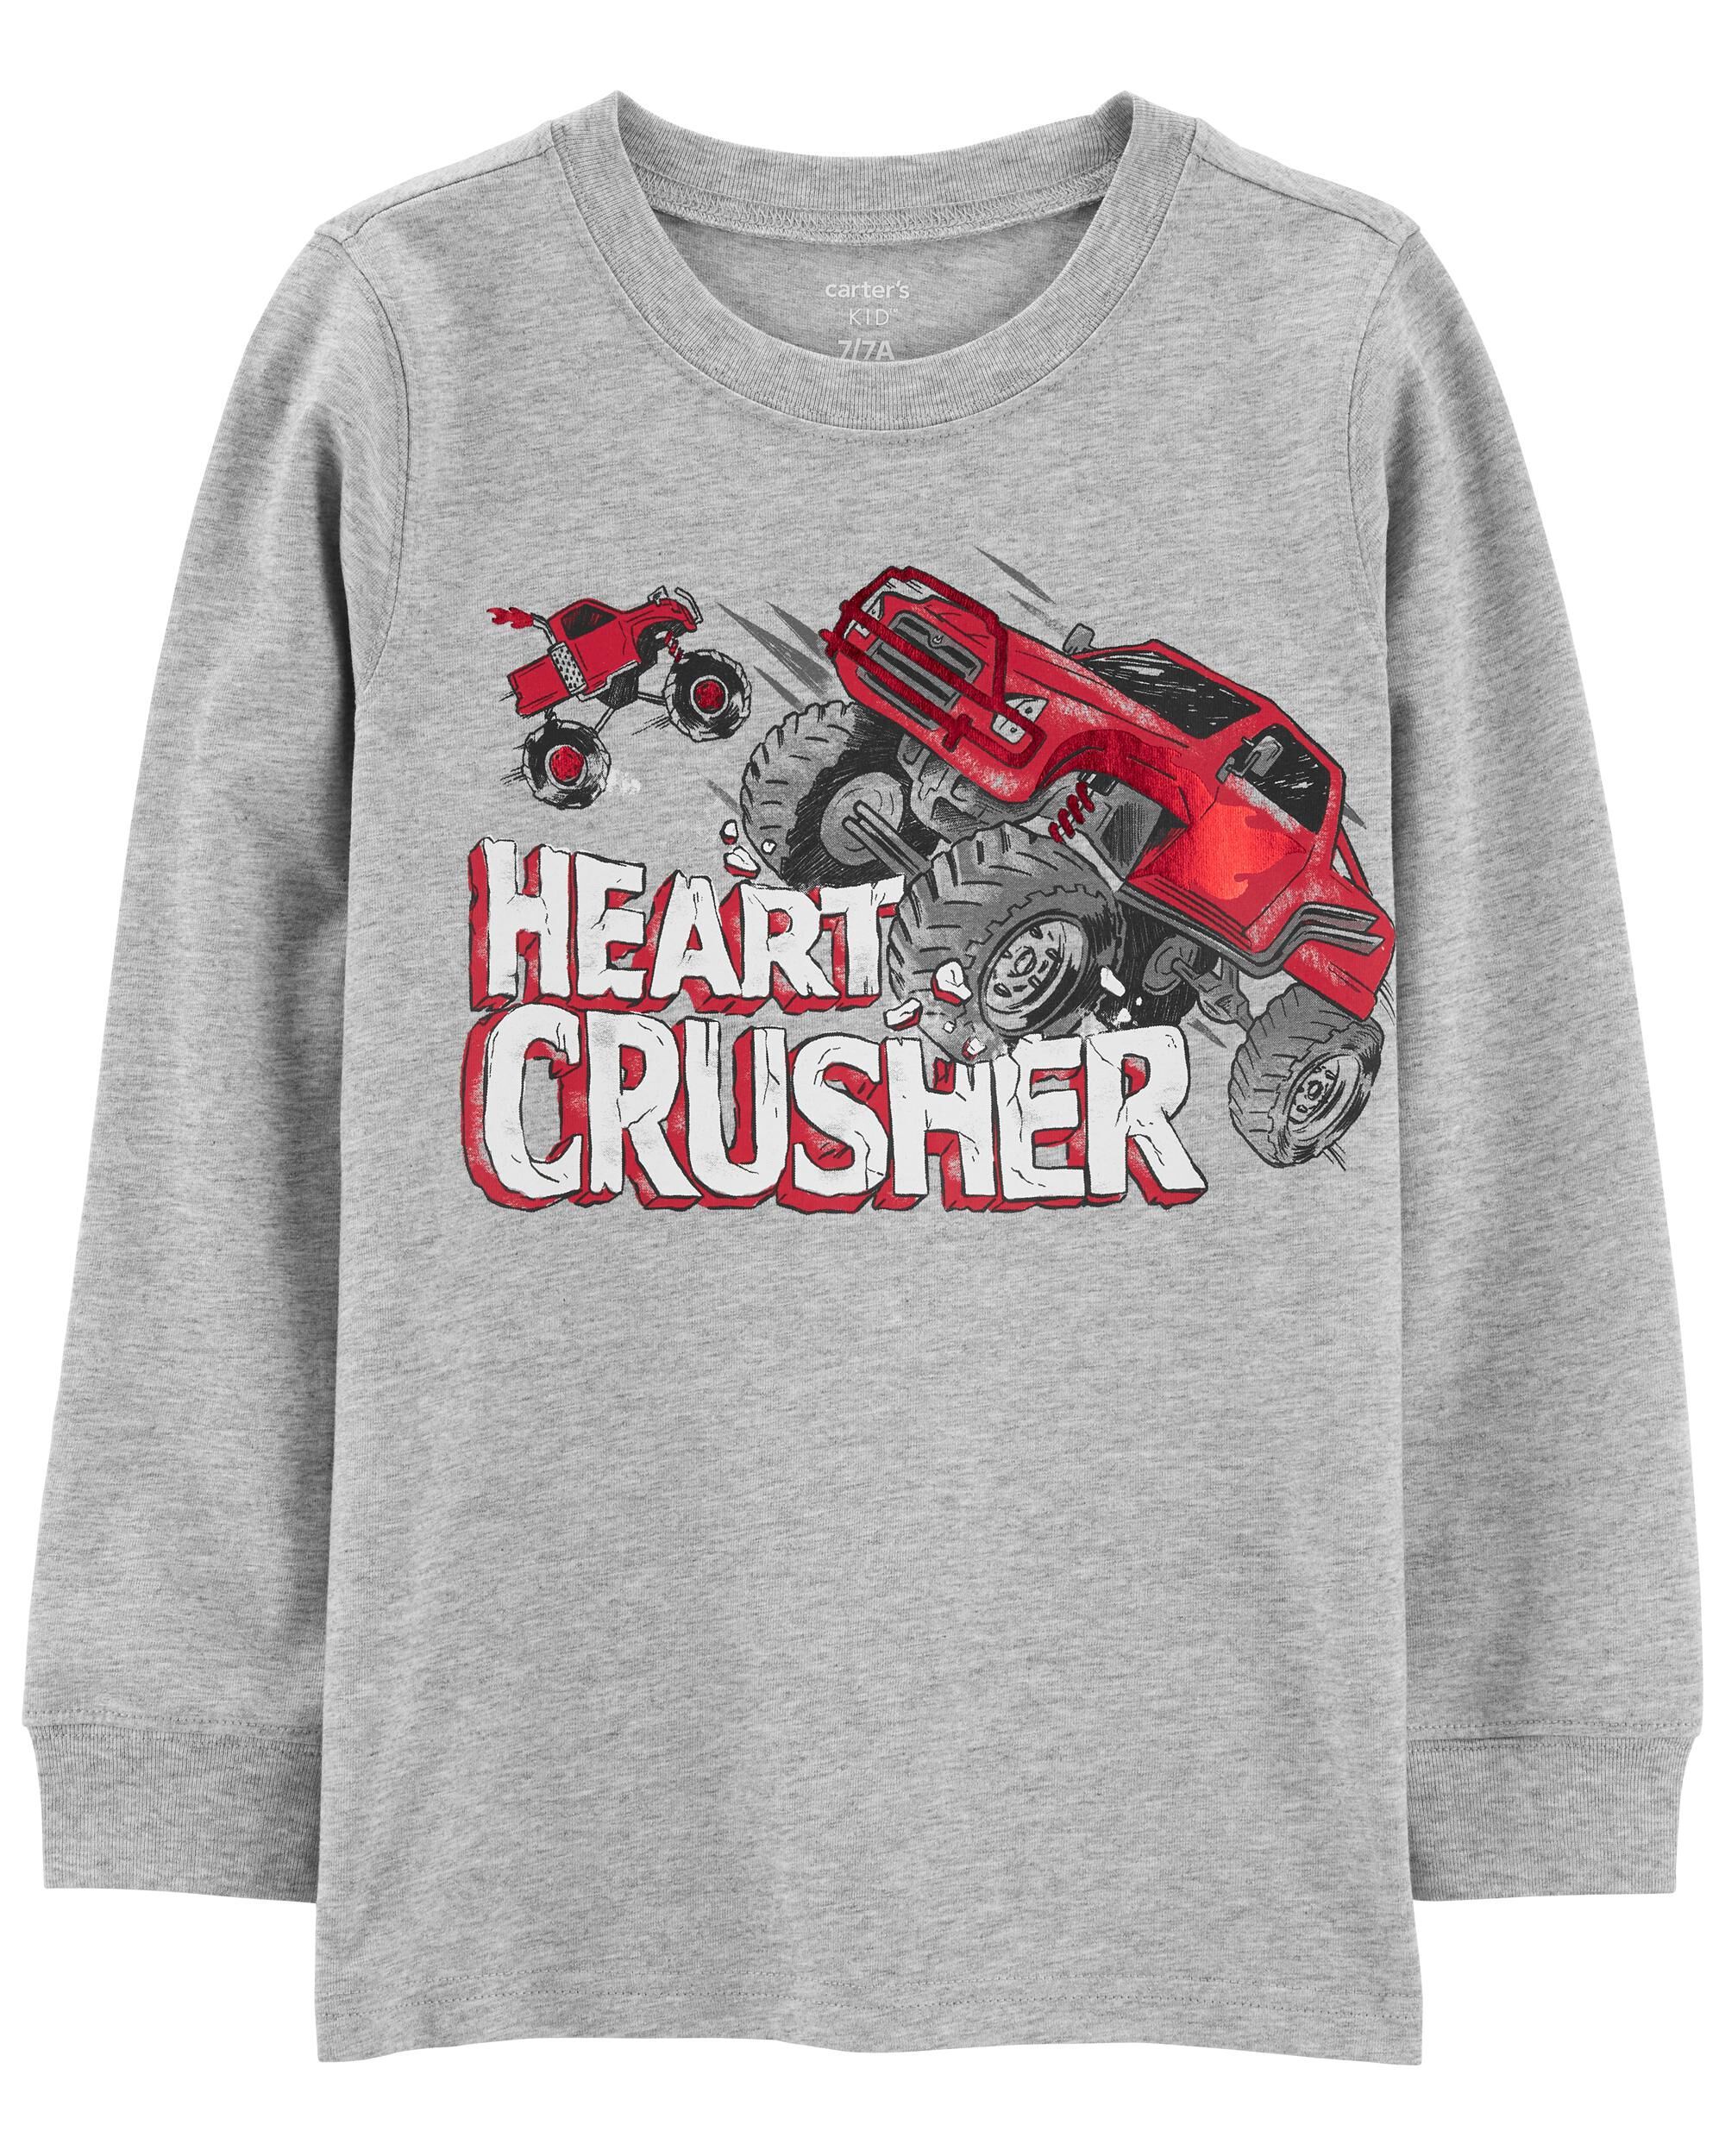 Grey Kid Valentine's Day Crusher Graphic Tee | carters.com | Carter's